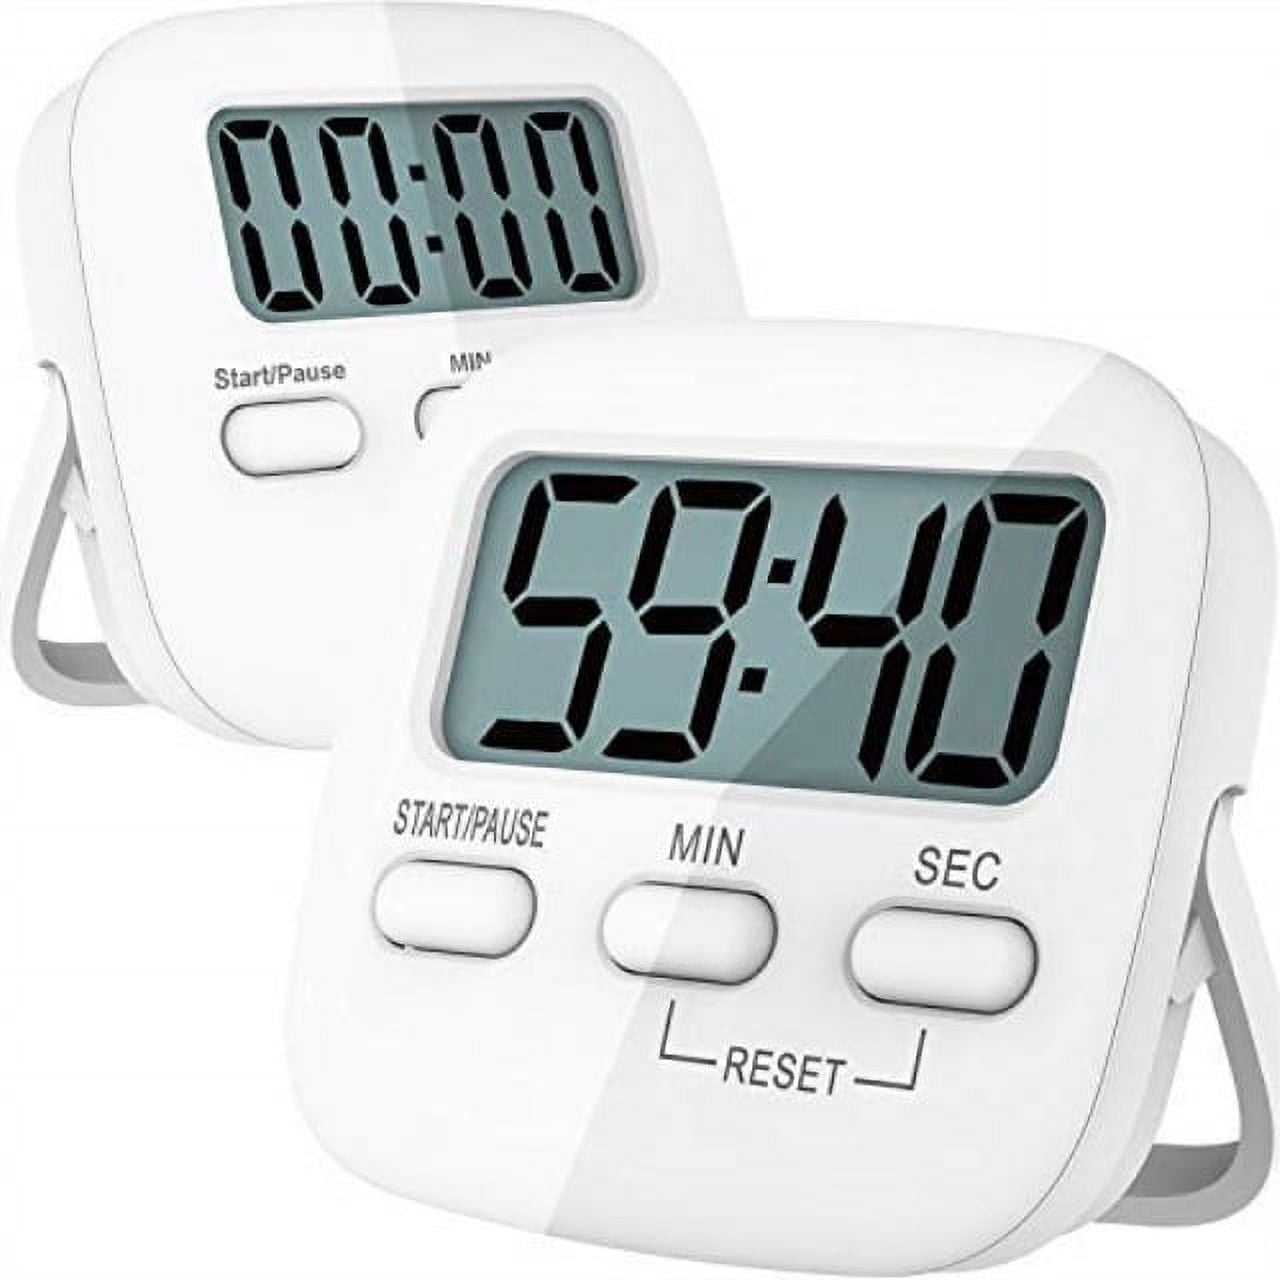 Uigos 2 Pack Digital Kitchen Timer II 2.0, Big Digits, Loud Alarm, Magnetic  Backing, Stand, for Cooking Baking Sports Games Office (White) (2 Pack)